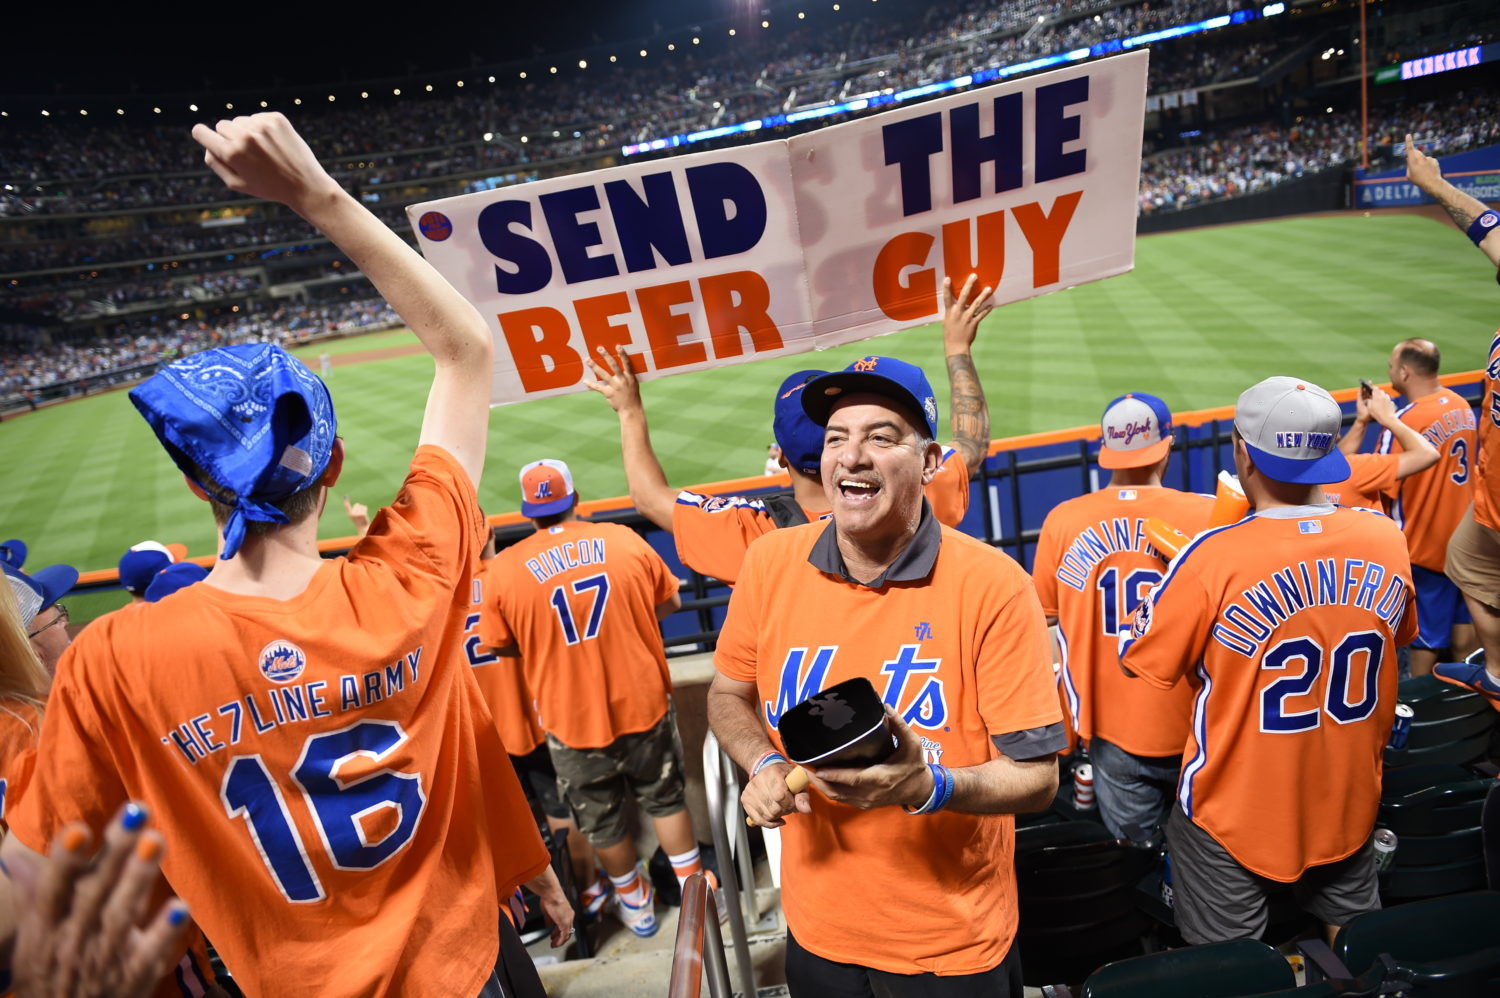 7 Line Army Wants a Mets Win and a Beer!